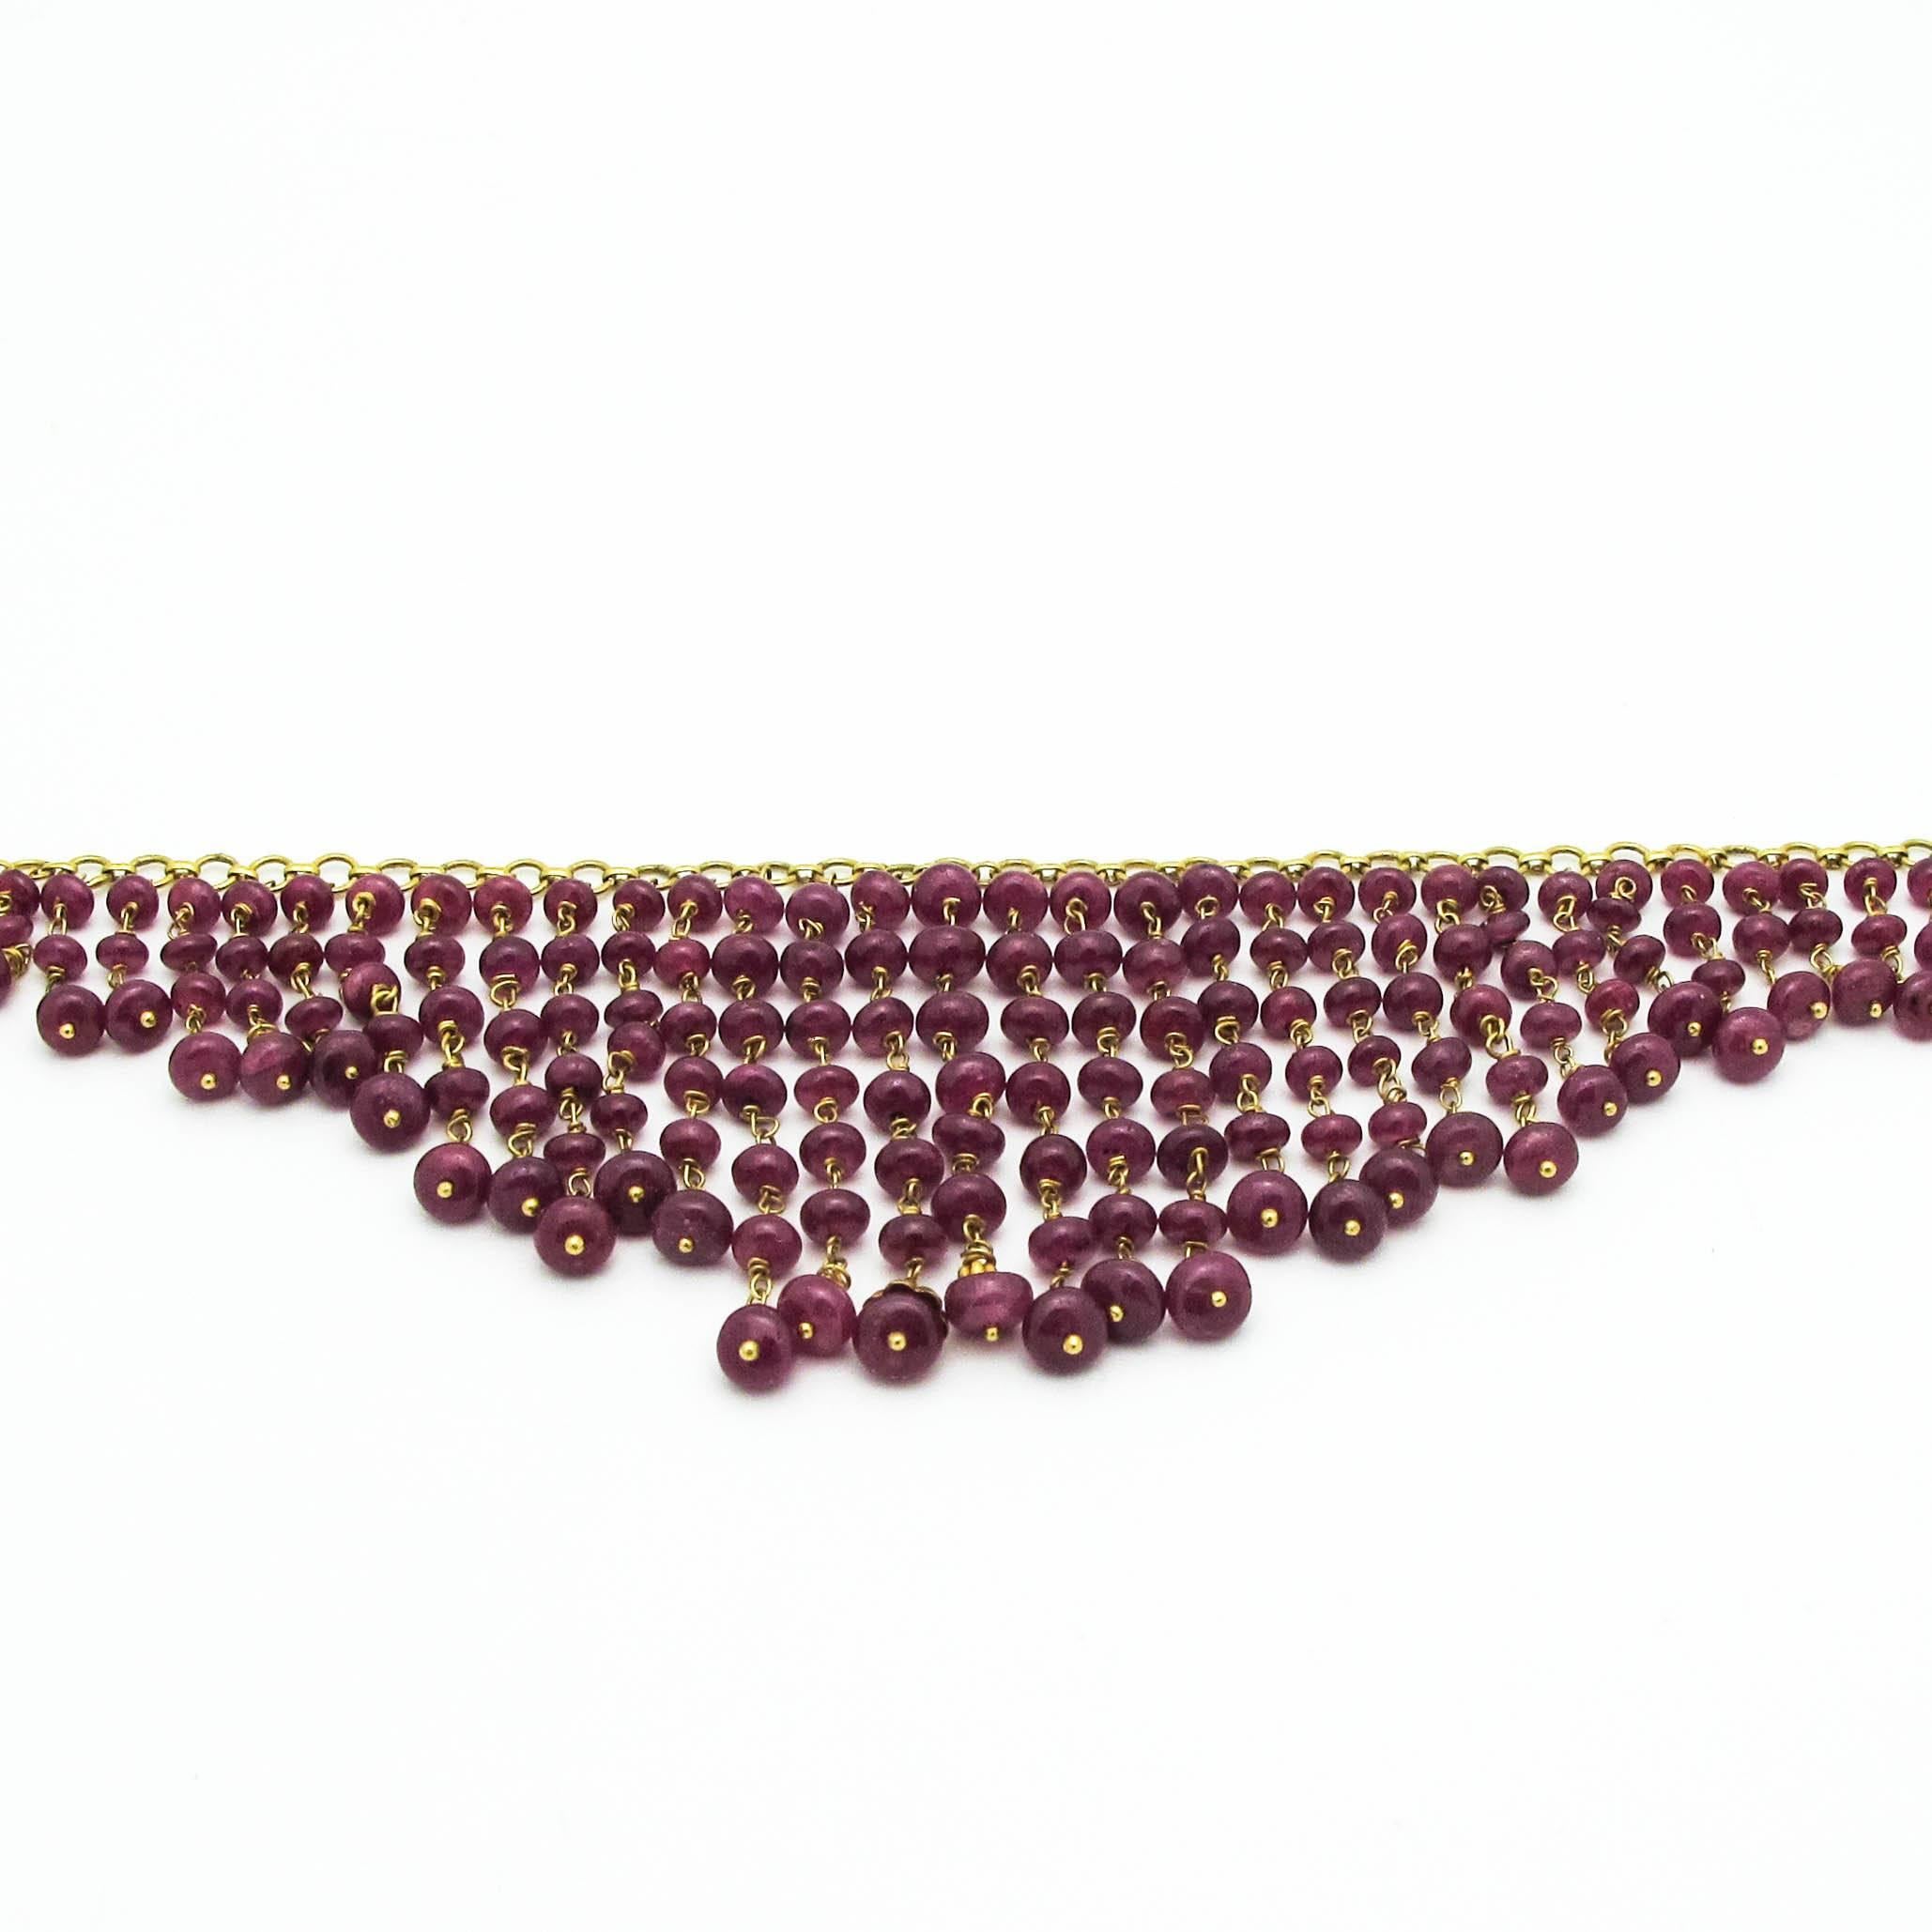 This is a beautiful ruby necklace. It's delicate, festive and feels great! The rubies are a rich warm medium dark pink and the gold is absolutely stunning!